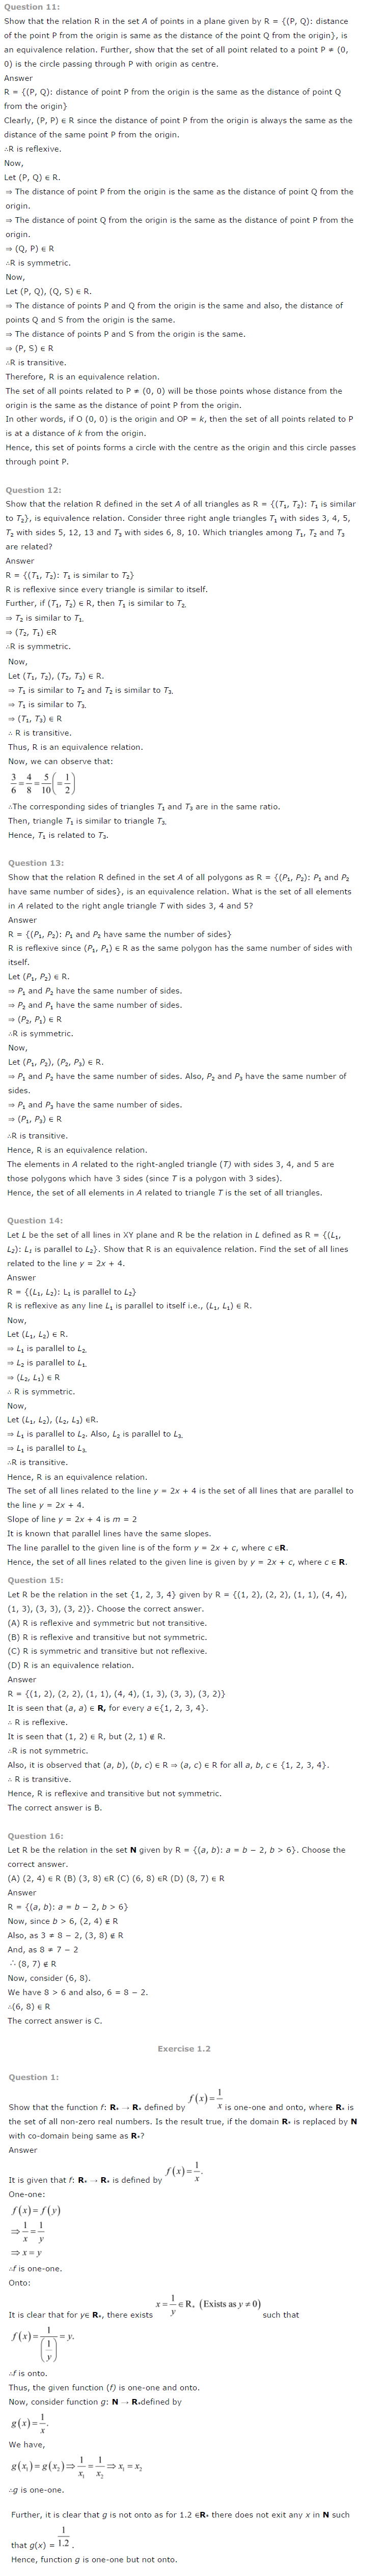 NCERT Solutions For Class 12 Maths Chapter 1 Relations and Functions Maths-3